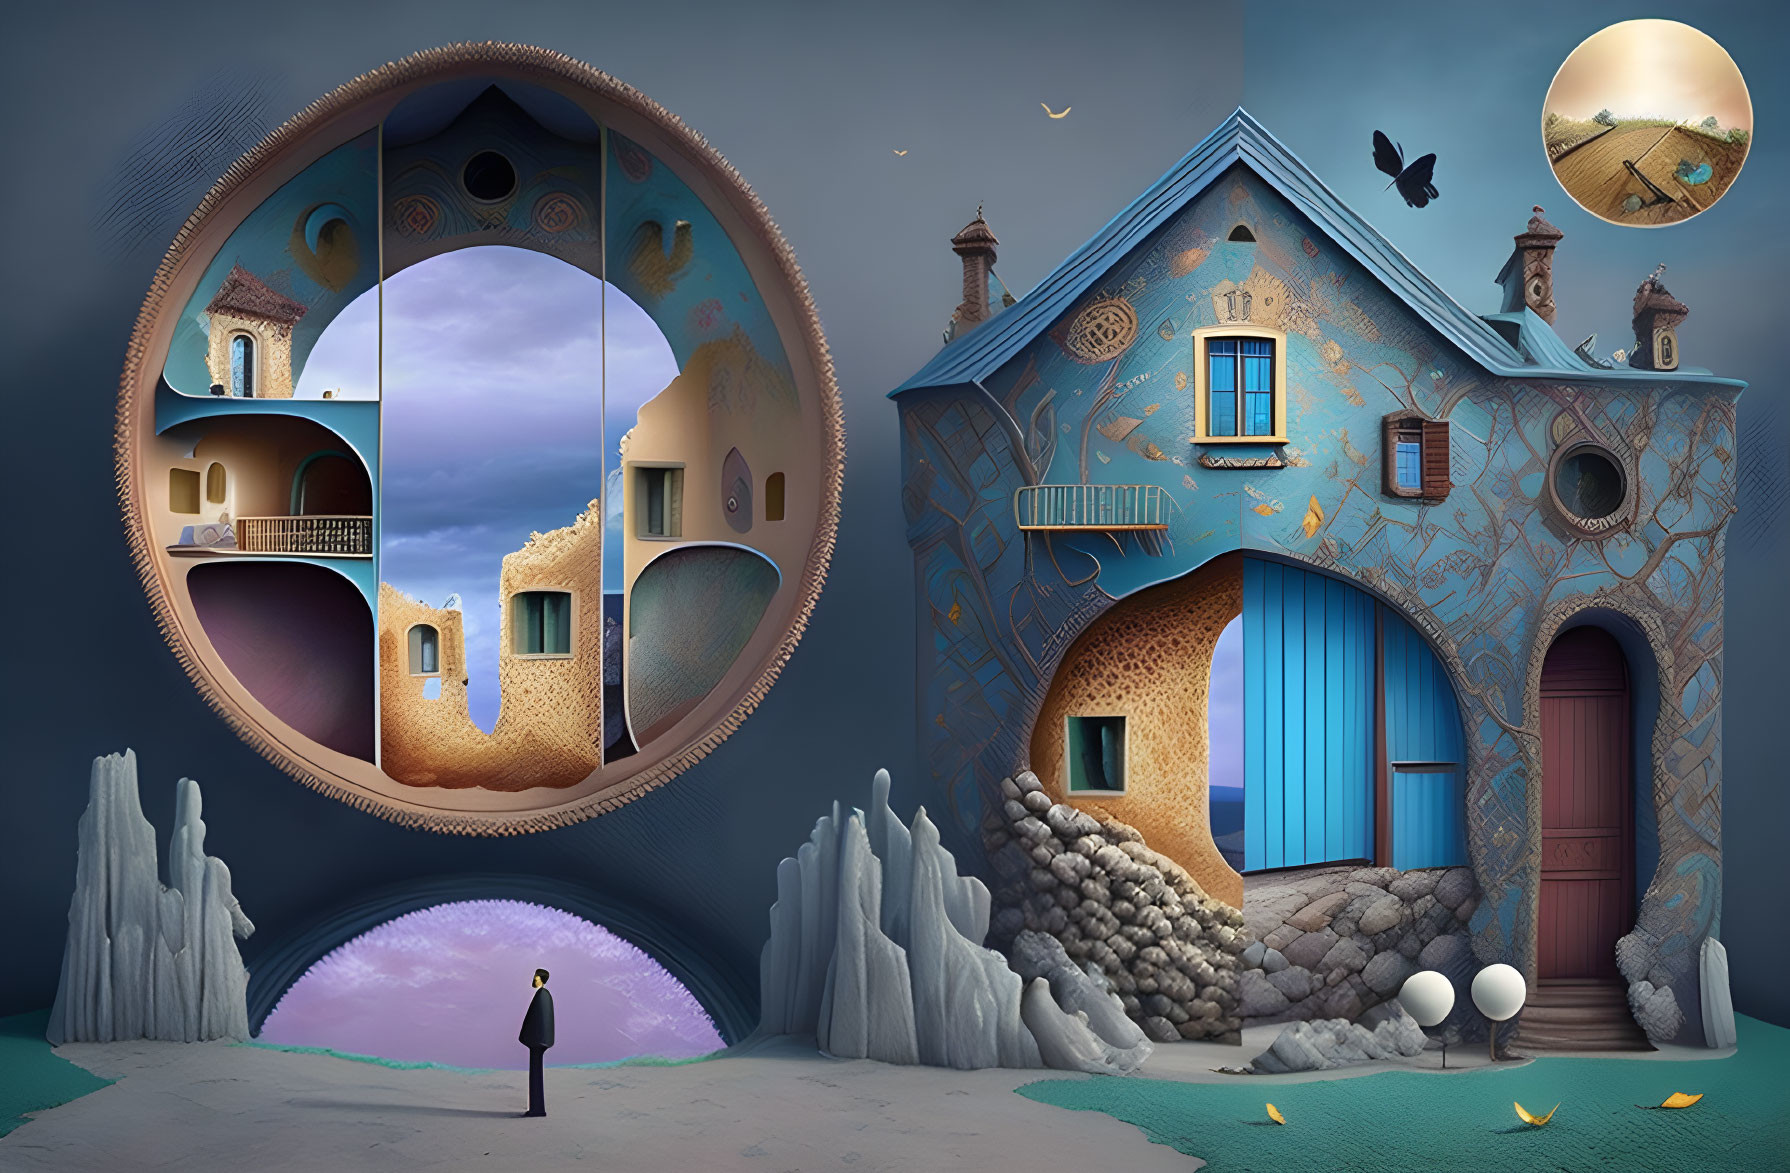 Surreal Artwork Featuring Person and Whimsical Structure with Round Doorways